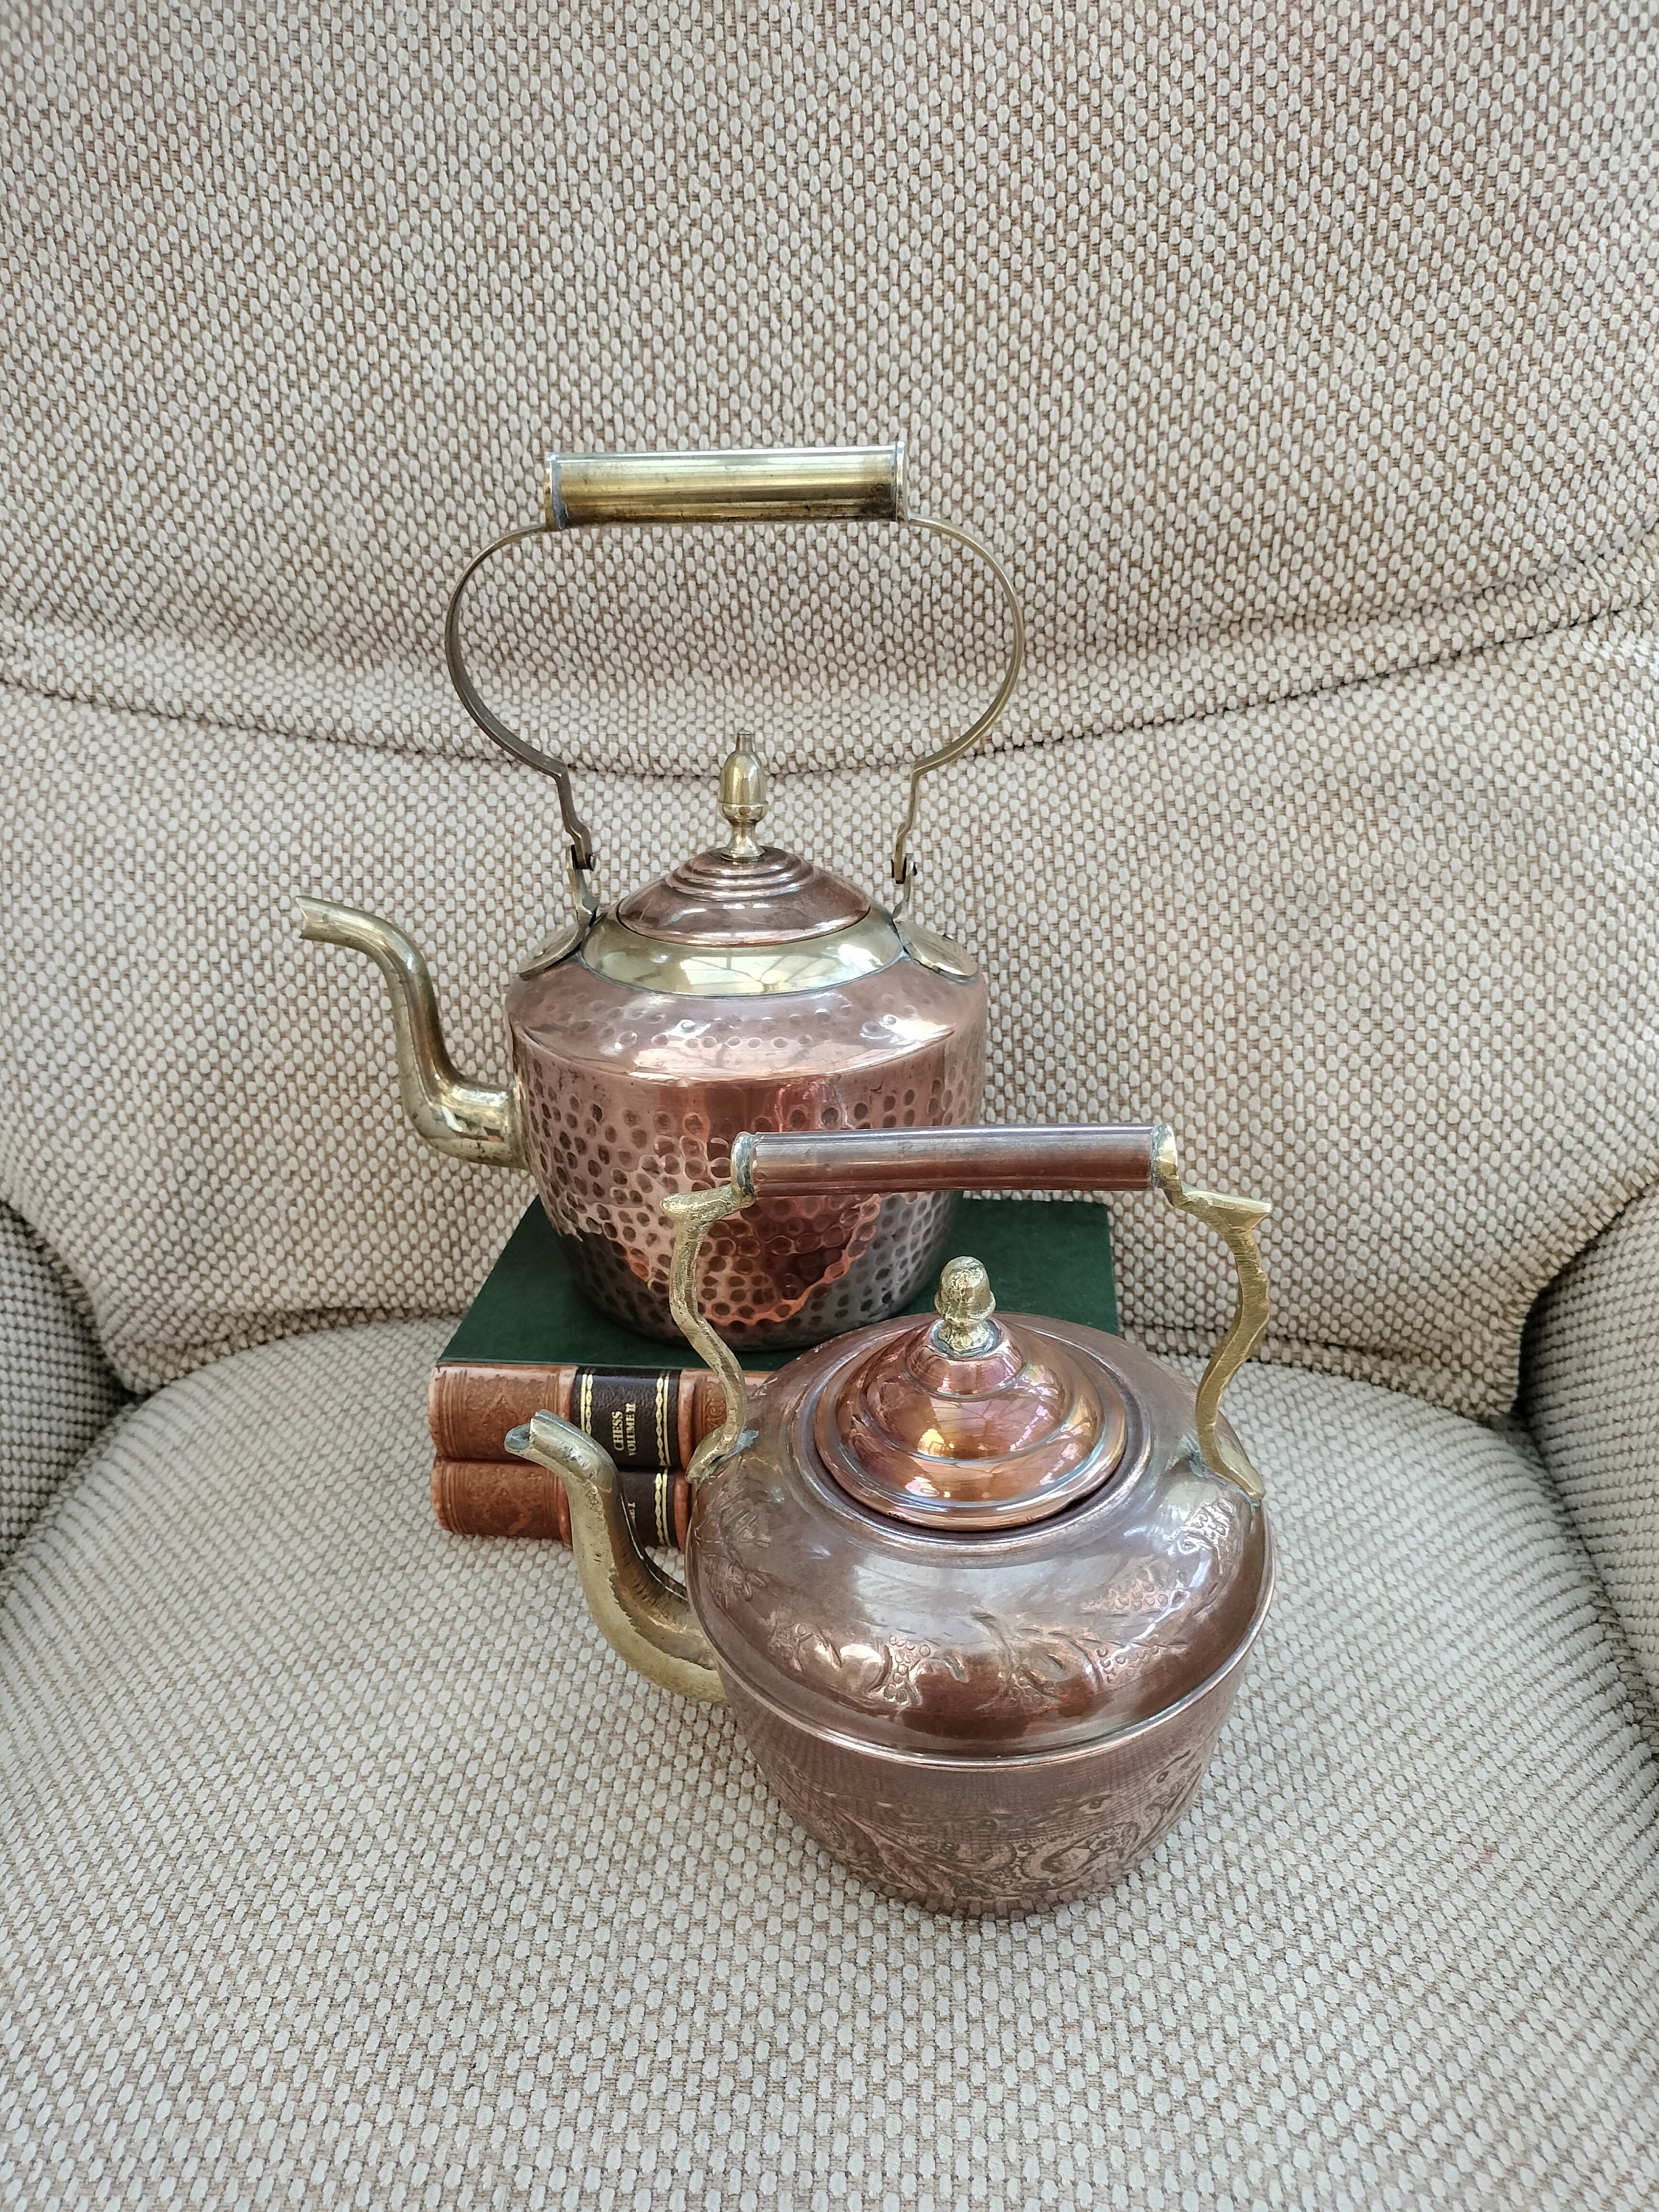 Vintage Antique Copper & Brass Water Kettle Moraccan Embossed